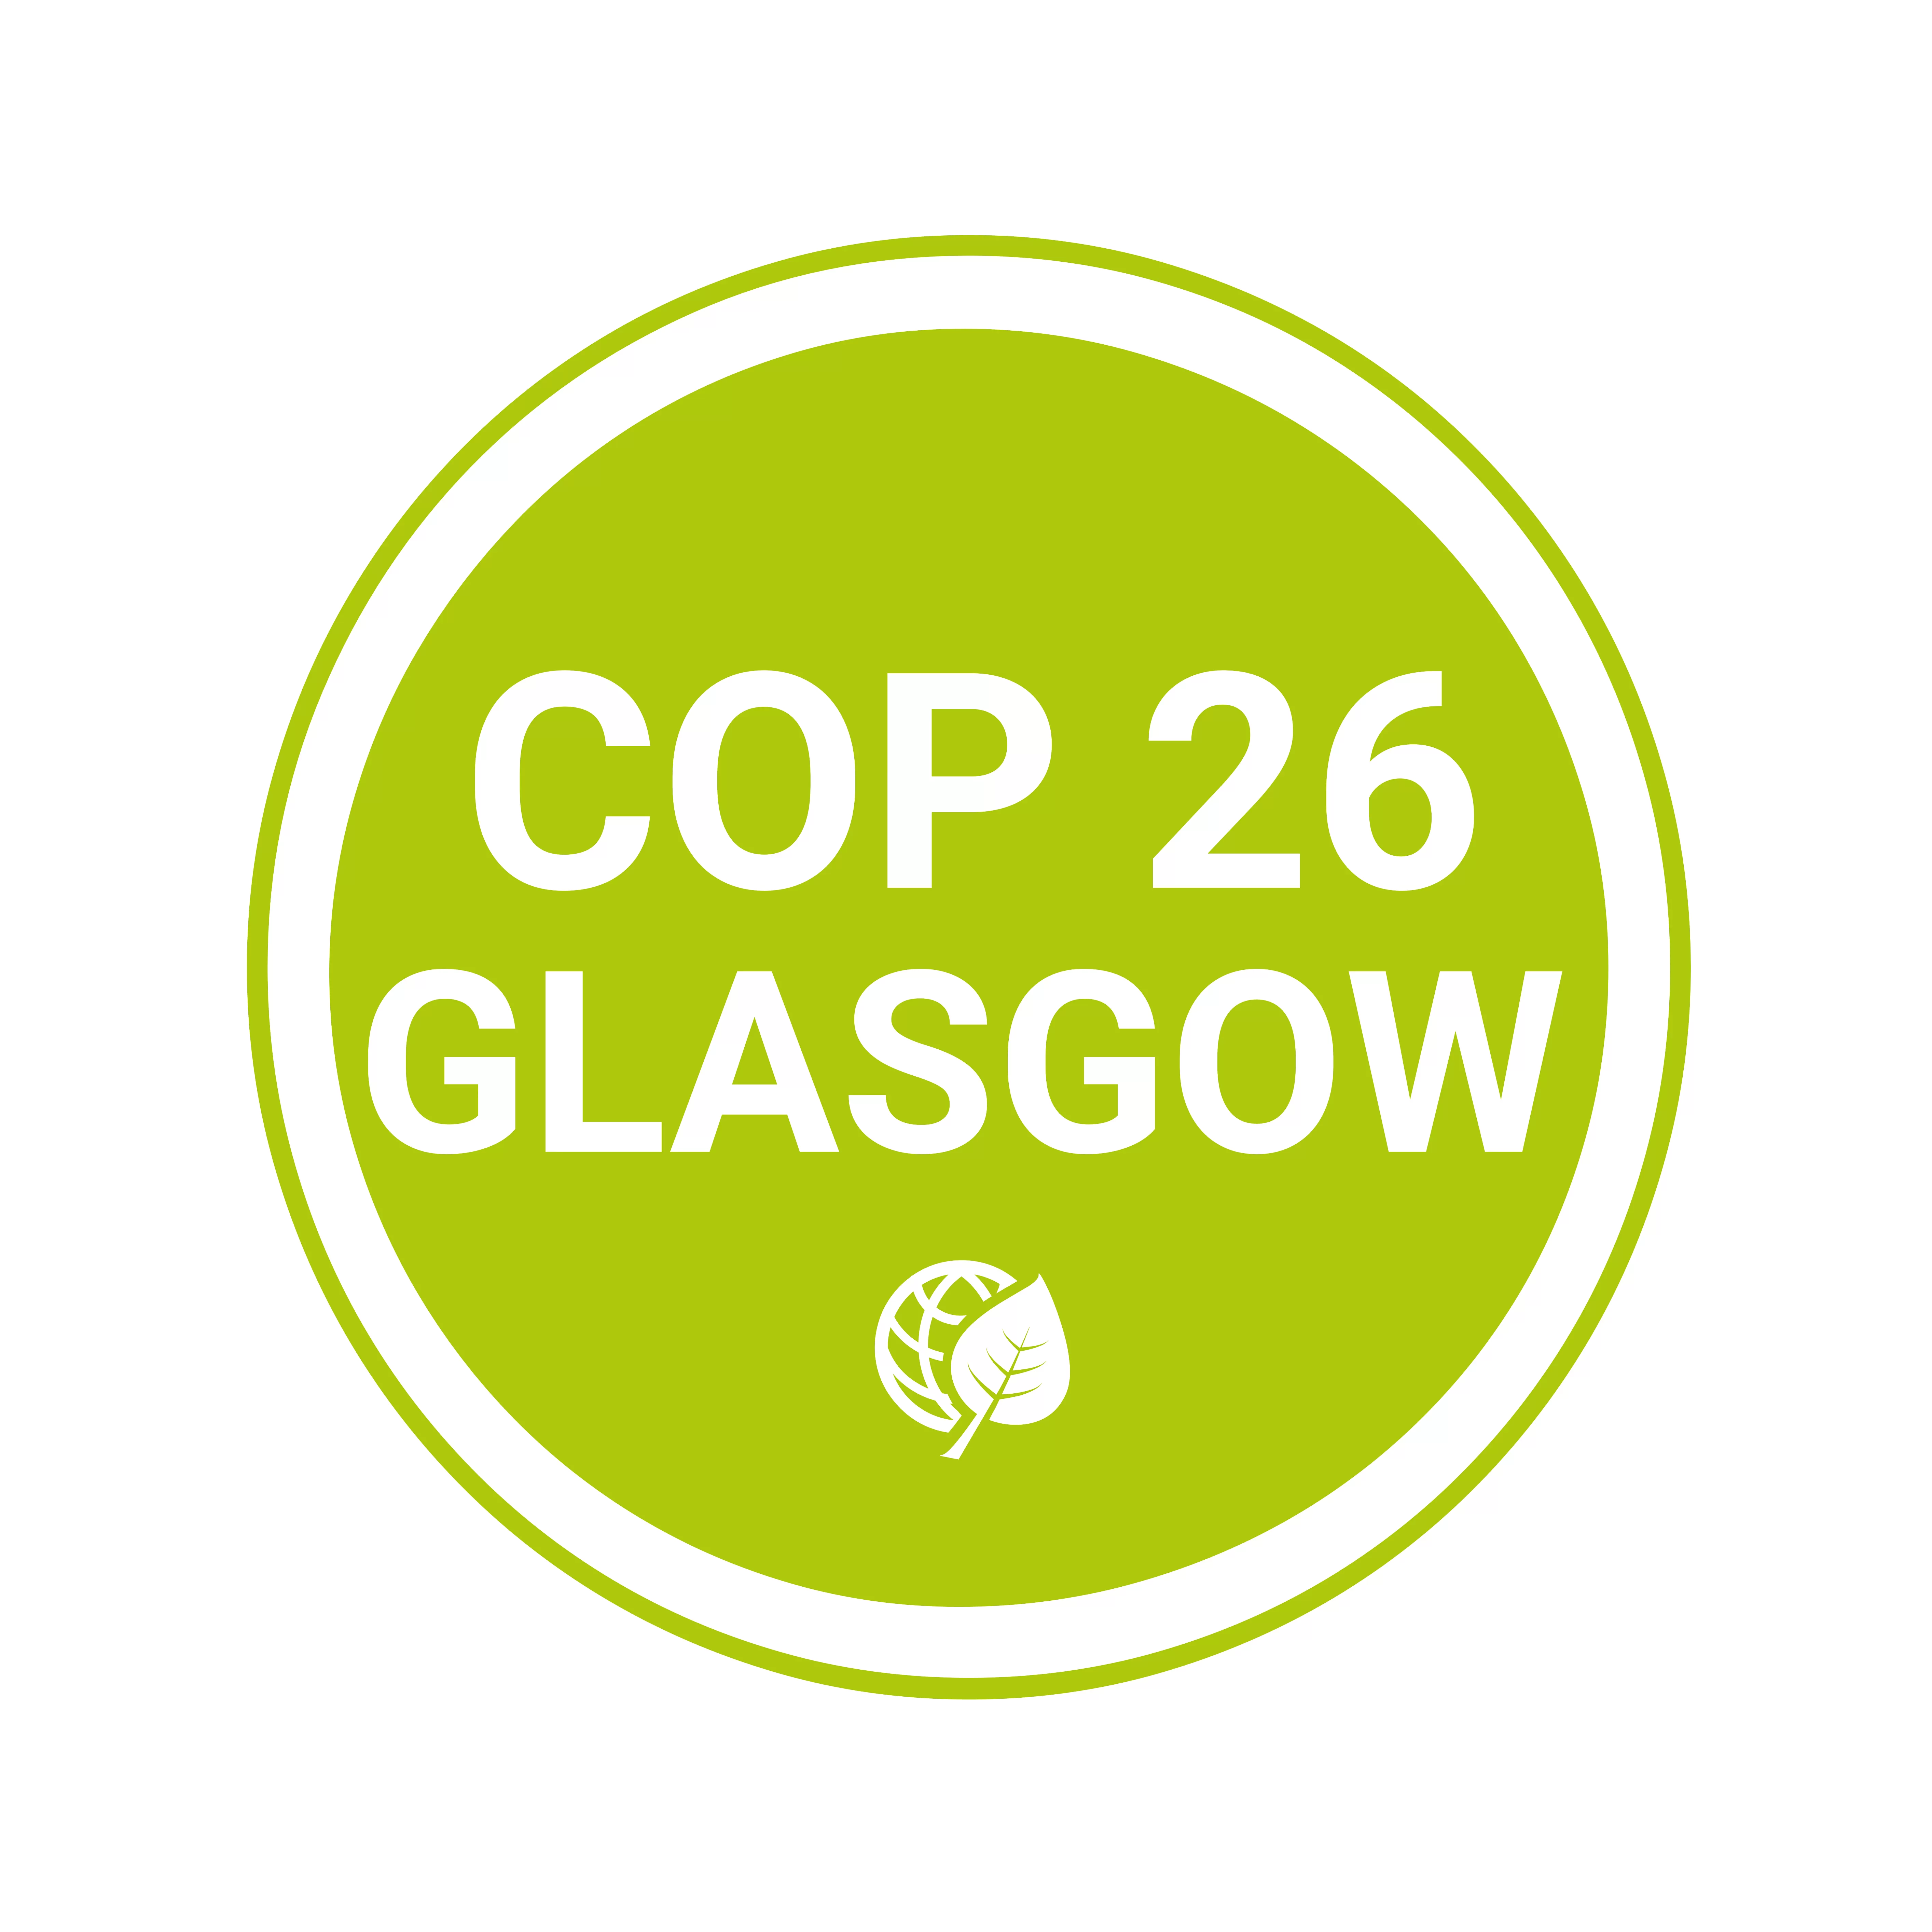 COP 26 in Glasgow has a global impact